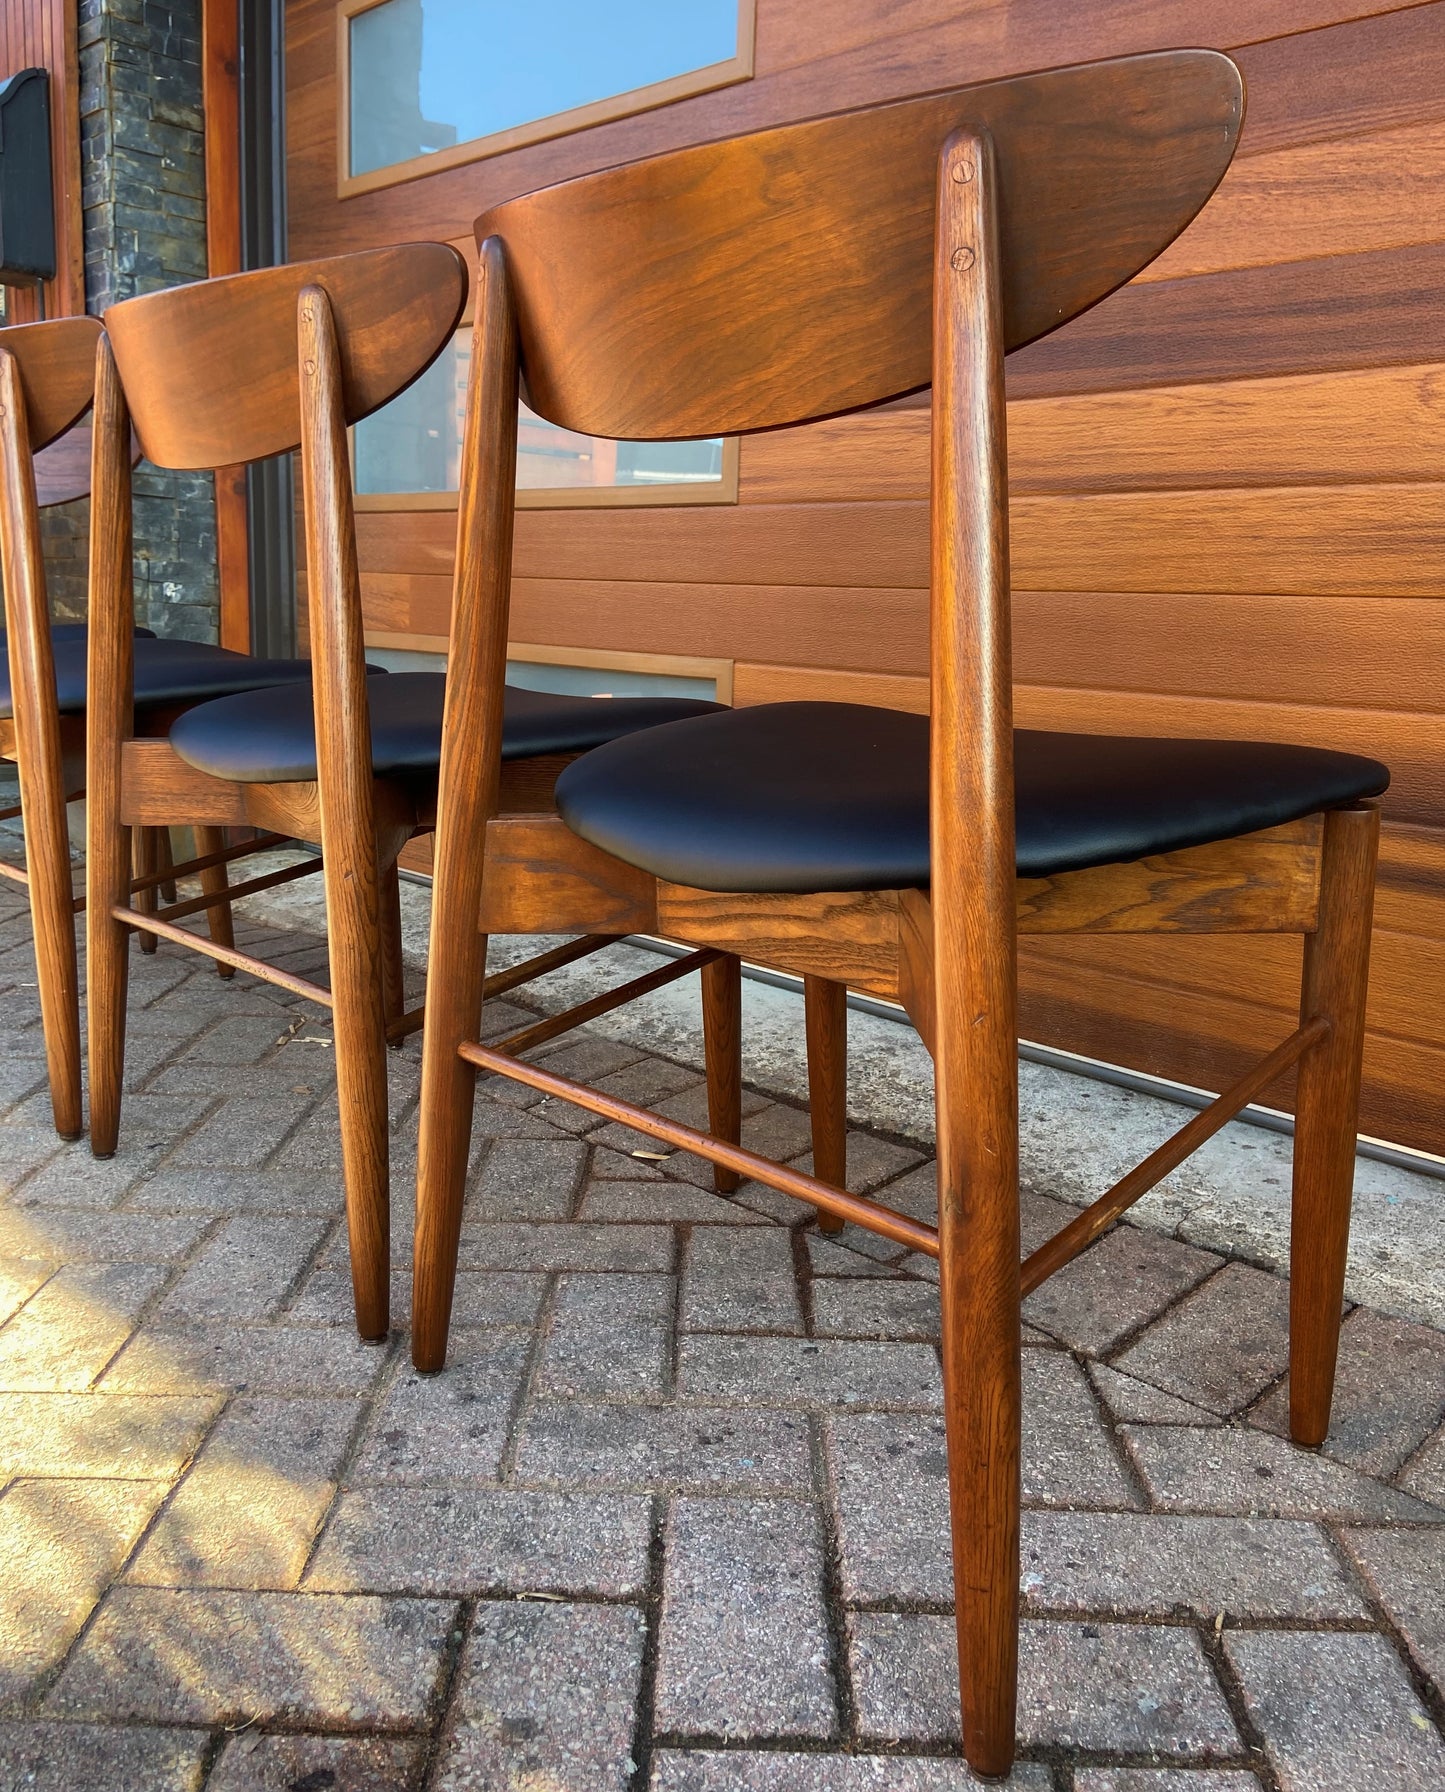 4 REFINISHED REUPHOLSTERED Mid Century Modern Walnut Chairs, Large